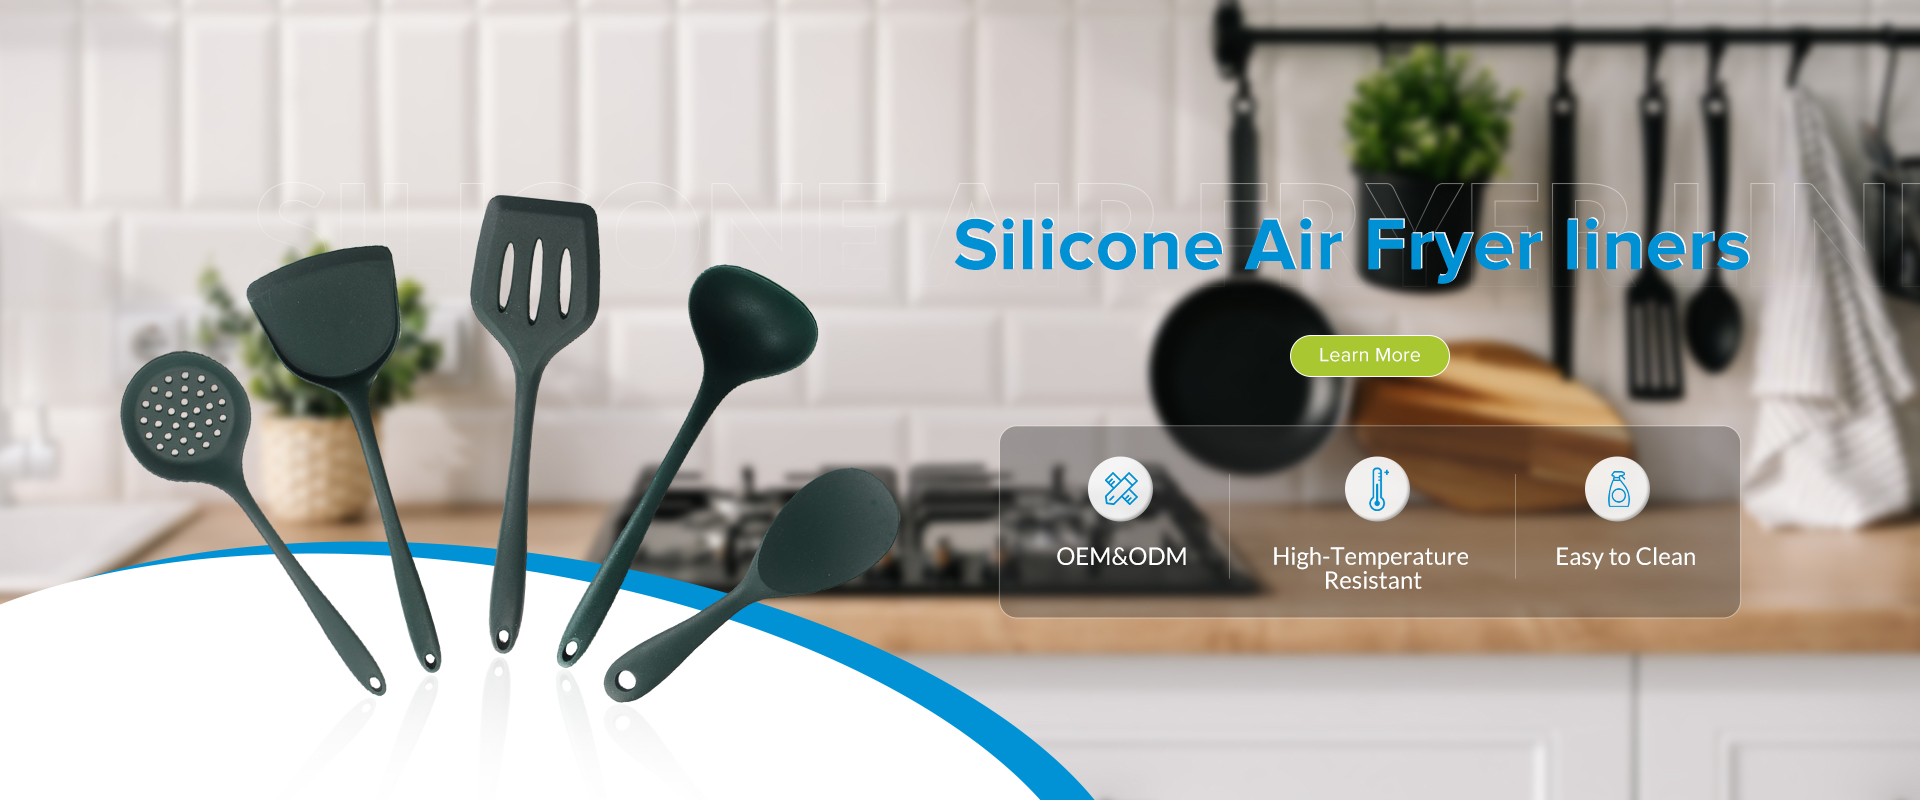 SiliconeAir Fryer liners